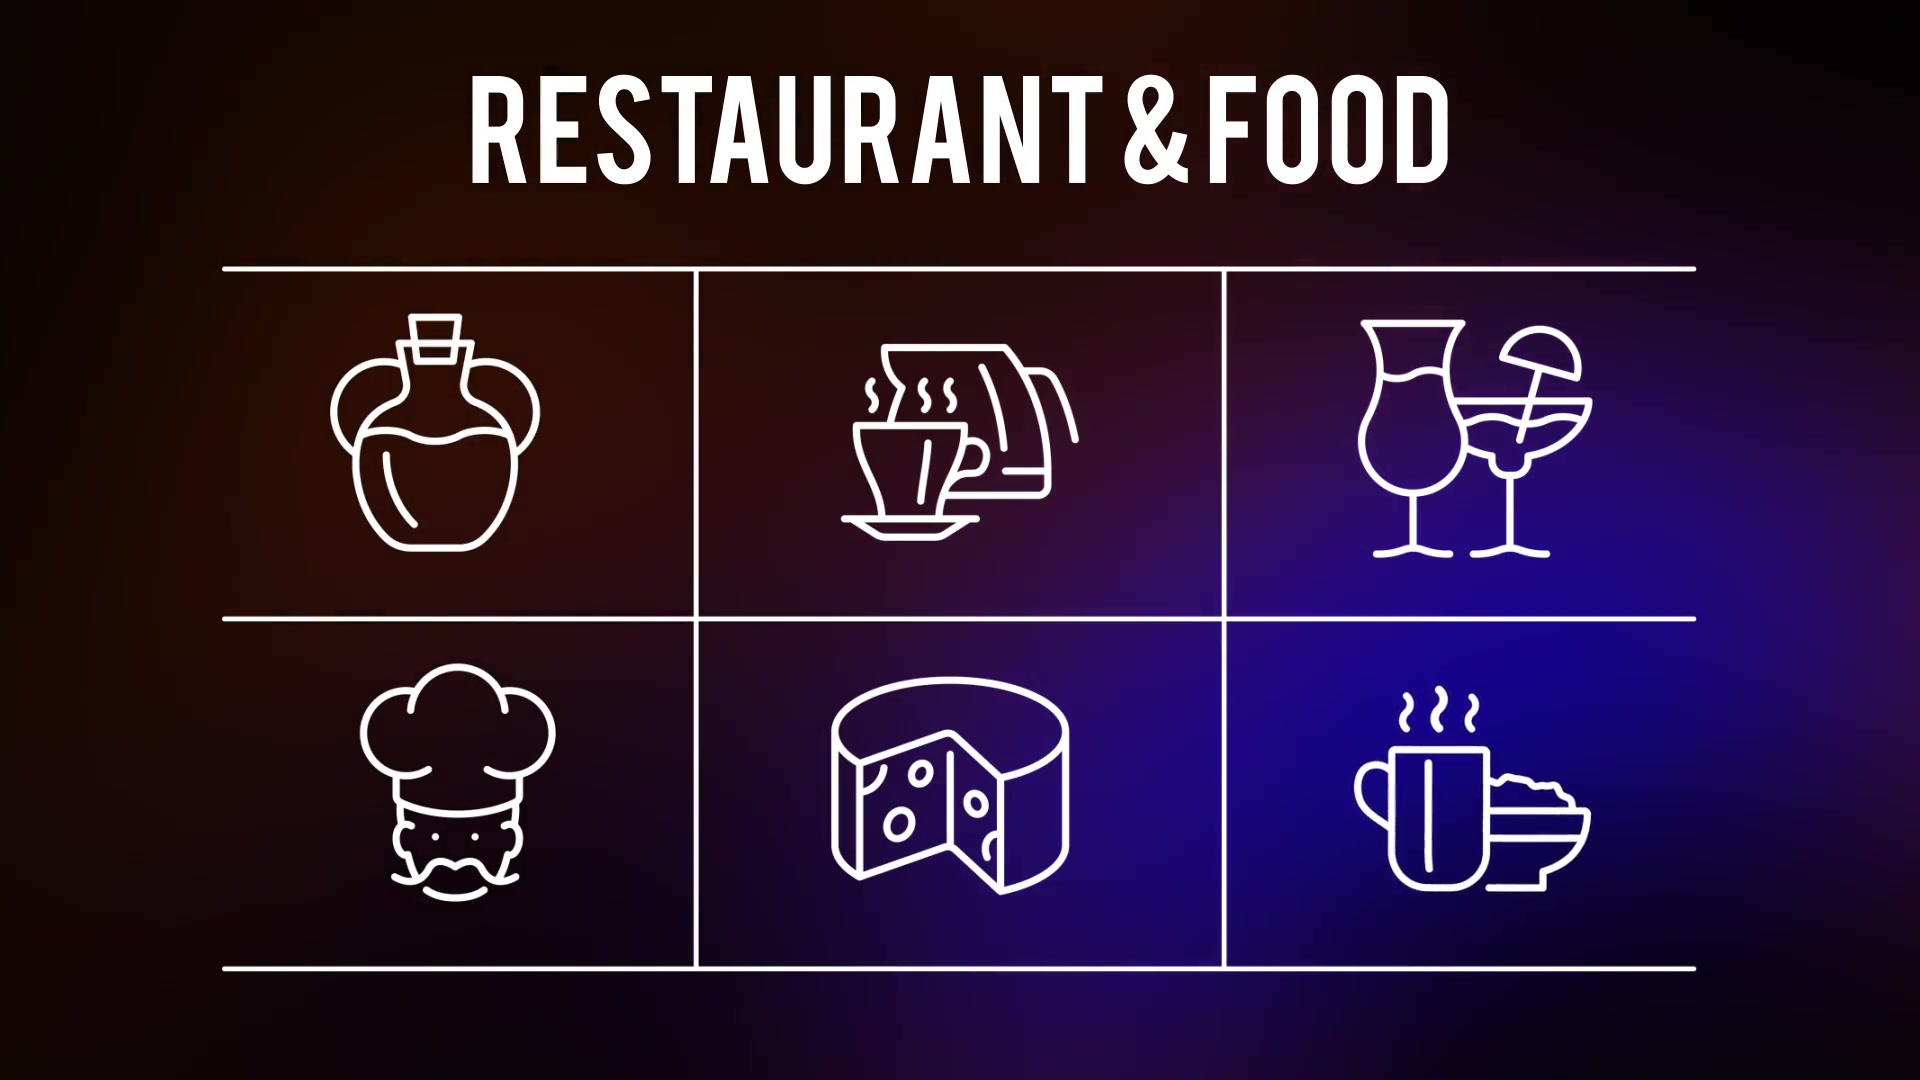 Restaurant And Food 25 Outline Icons - Download Videohive 23195194